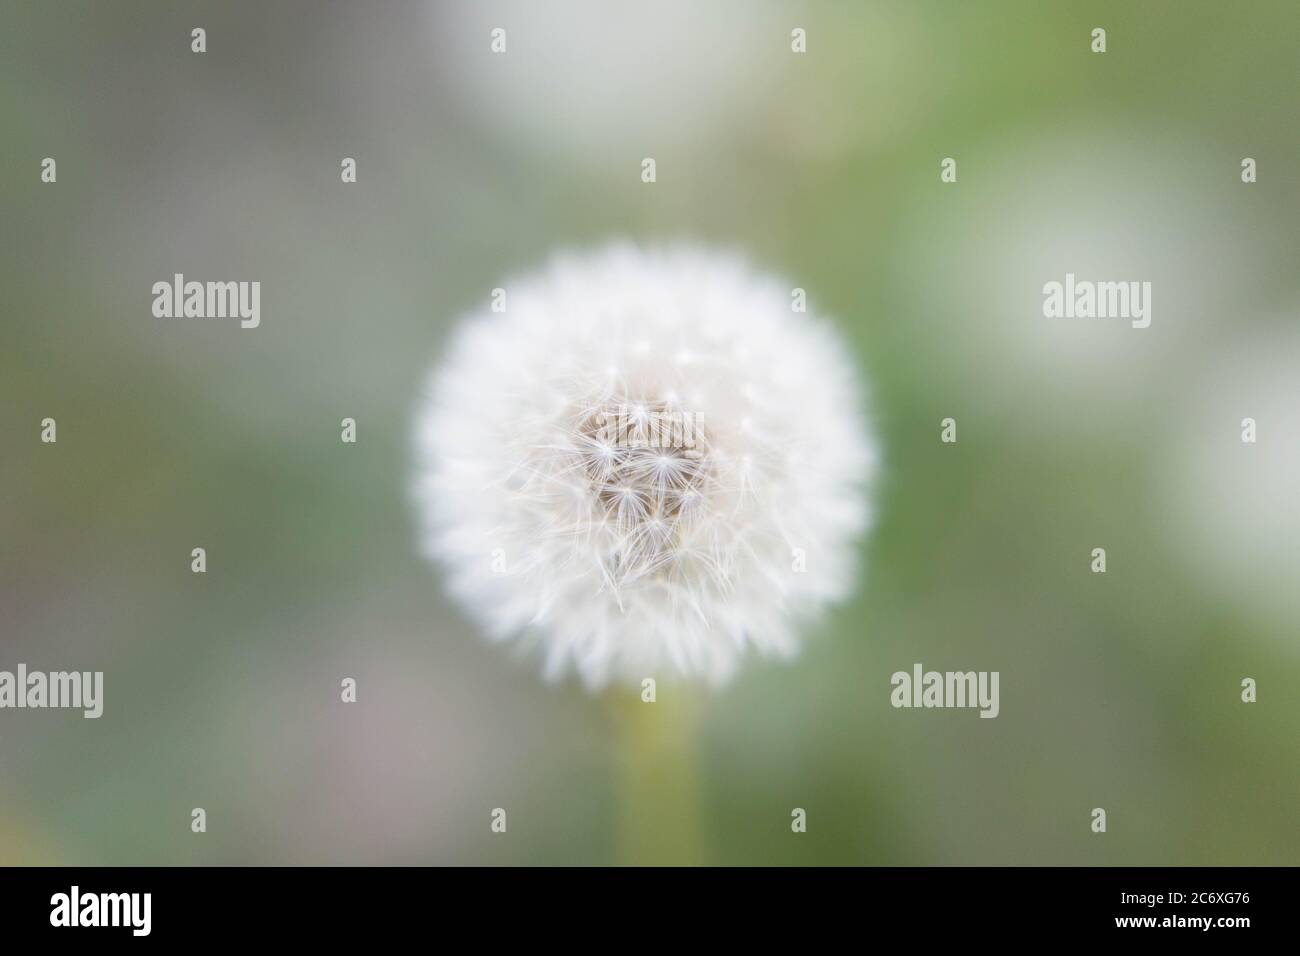 Close up dandelion fluff wishes Stock Photo